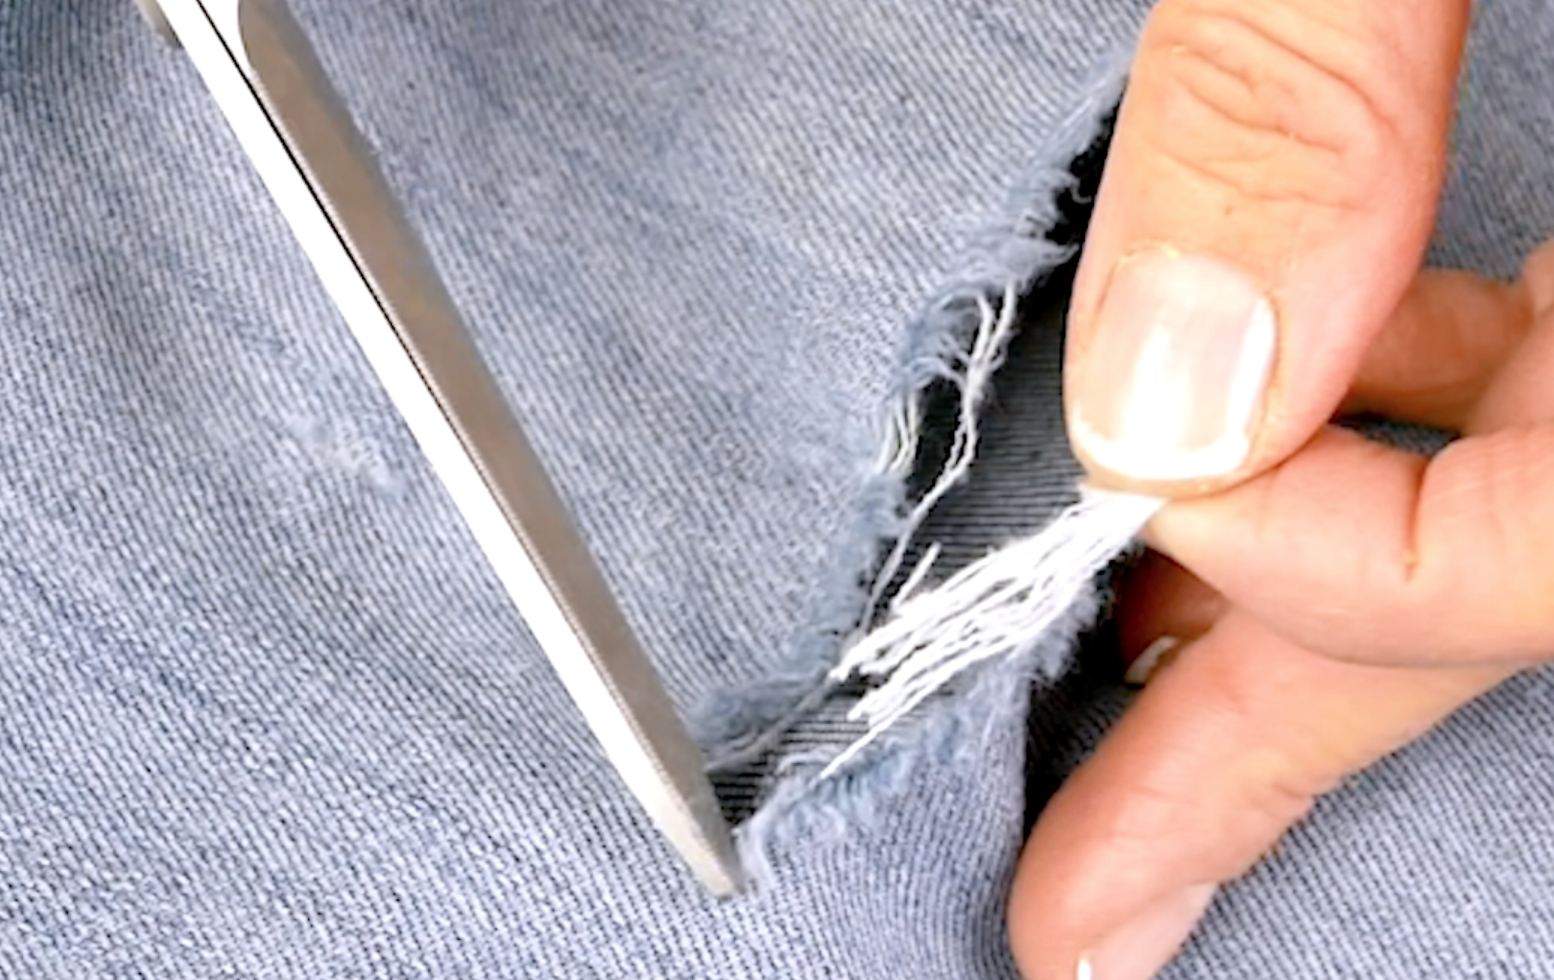 Easy Tutorial on How to Sew a Patch on Jeans